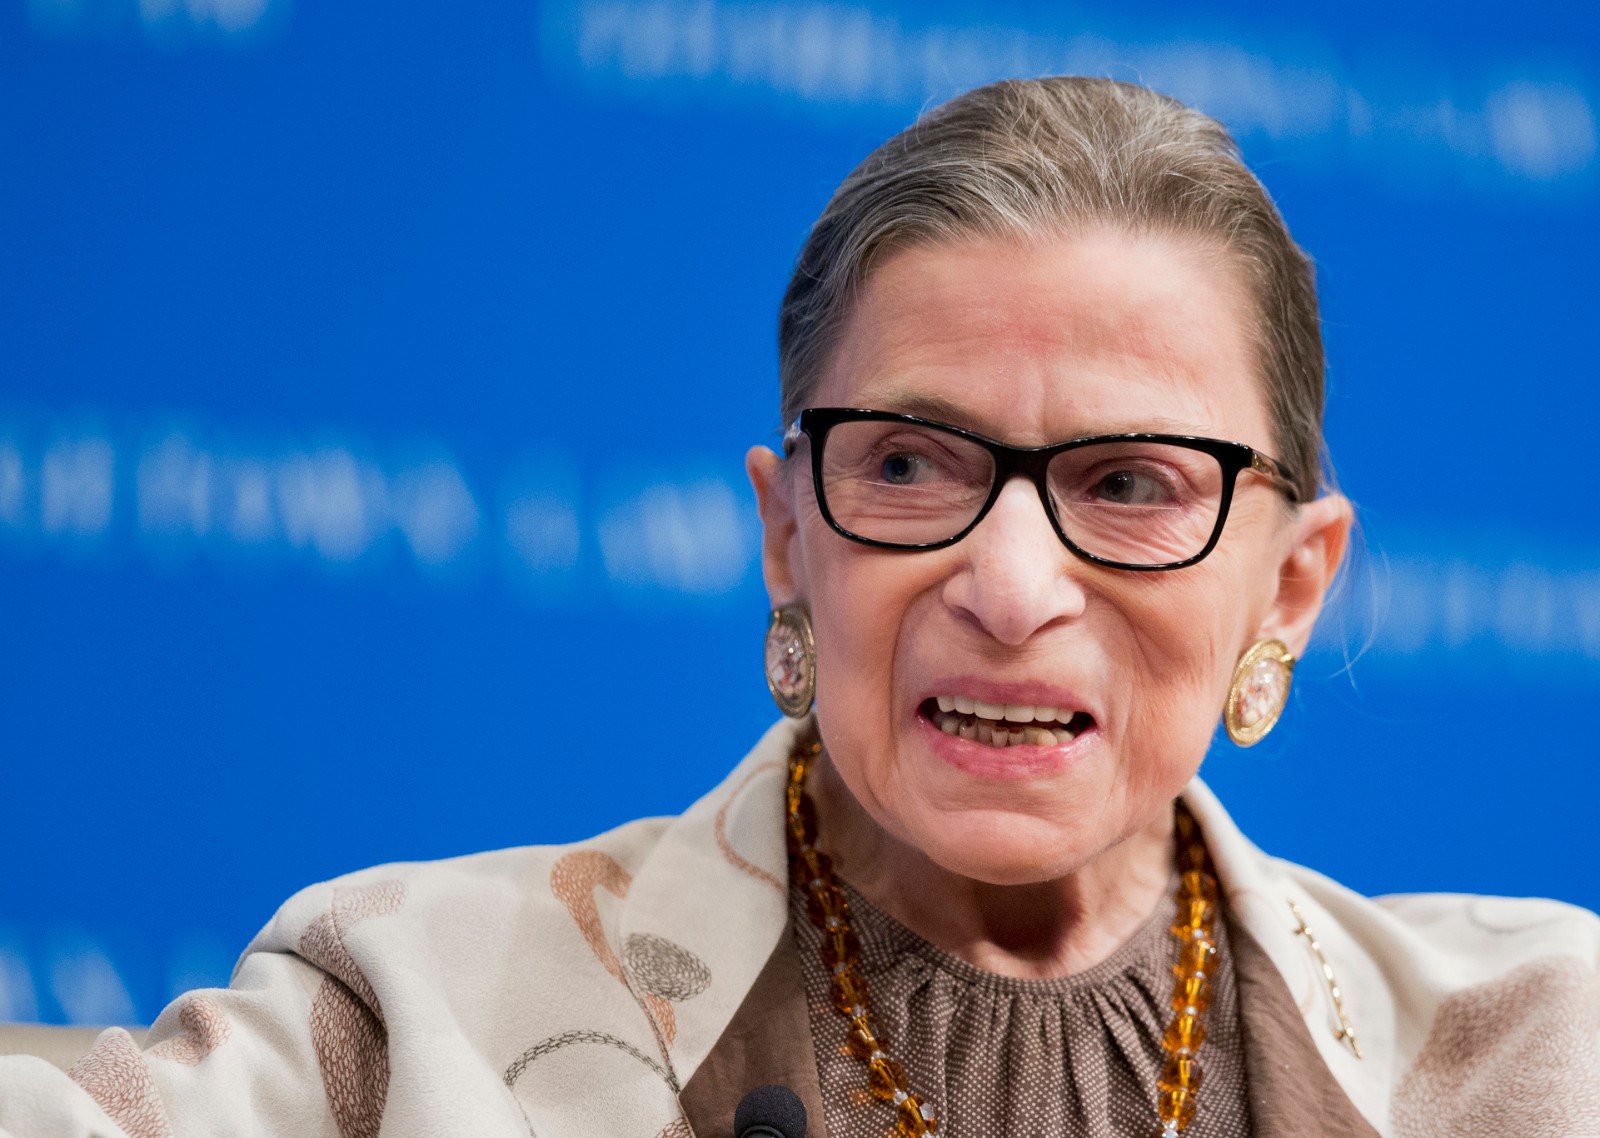 FILE - In this Feb. 4, 2015 file photo, Supreme Court Justice Ruth Bader Ginsburg speaks at Georgetown University Law Center in Washington. Ginsburg’s public criticism of Donald Trump is dividing legal experts over whether the leader of the court’s liberal wing should recuse herself in any future case involving him.  (AP Photo/Manuel Balce Ceneta, File)